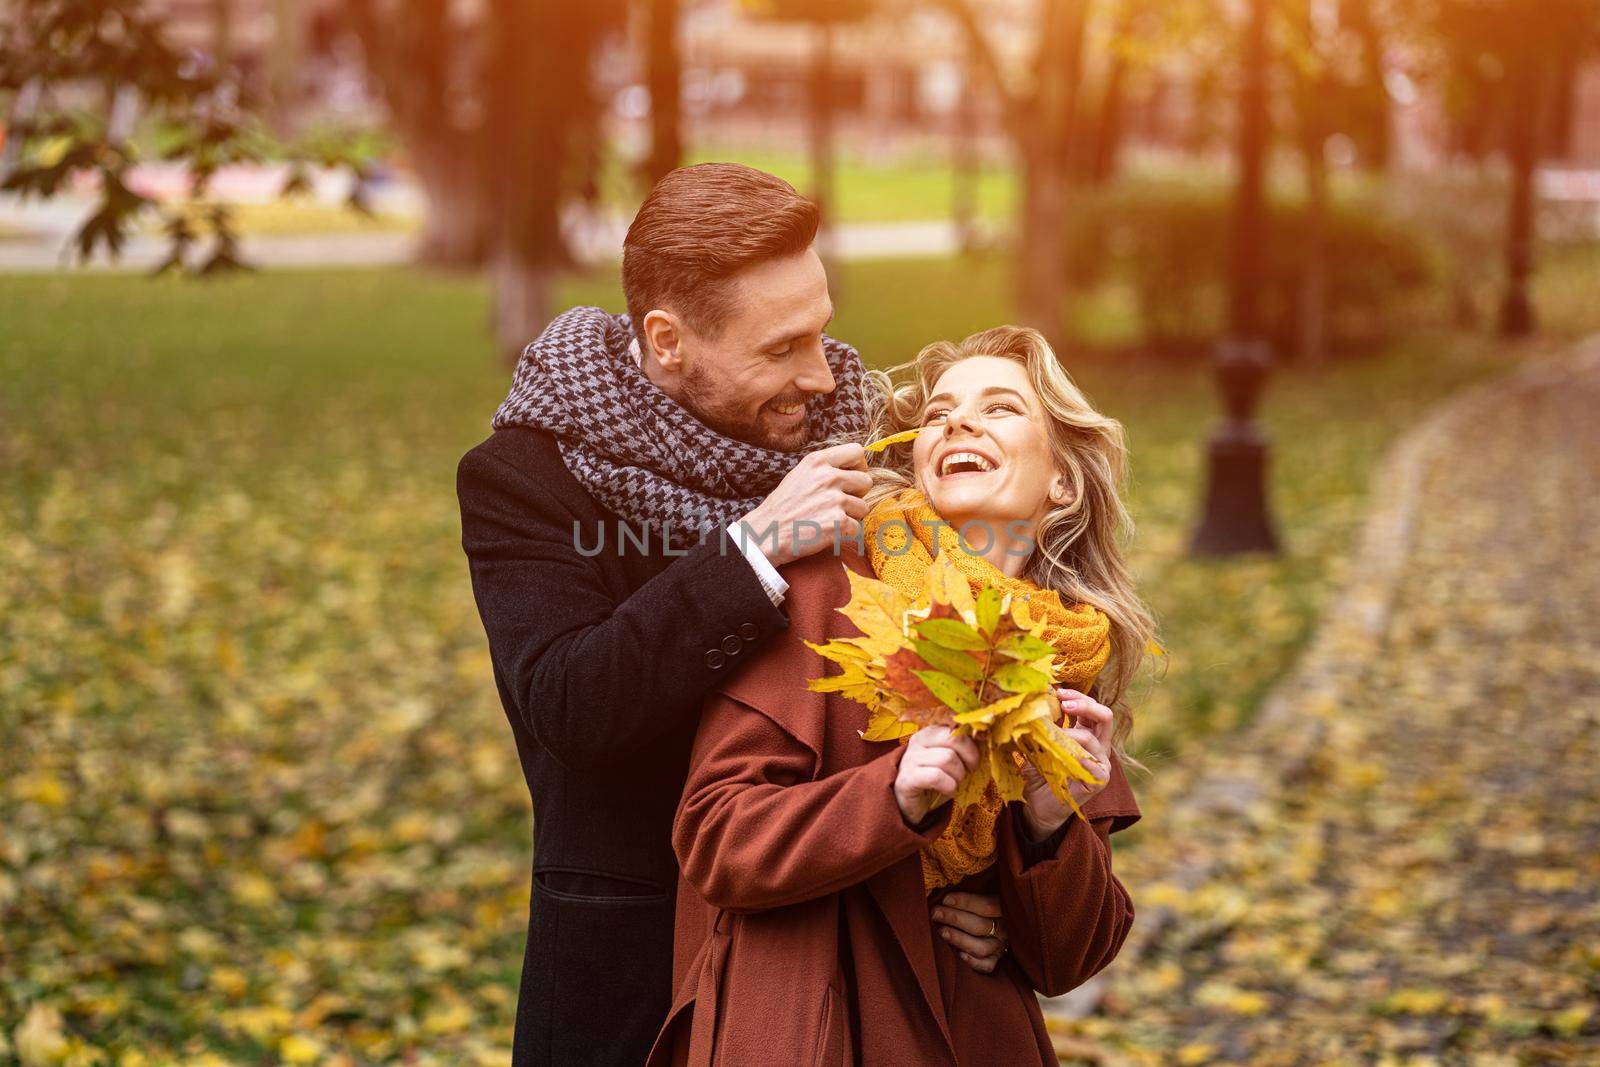 Happy young people in love, man hugging woman from behind stroking her cheek, happy couple walking in a autumn park wearing stylish coats and picking up fallen leaves. Family and people concept by LipikStockMedia